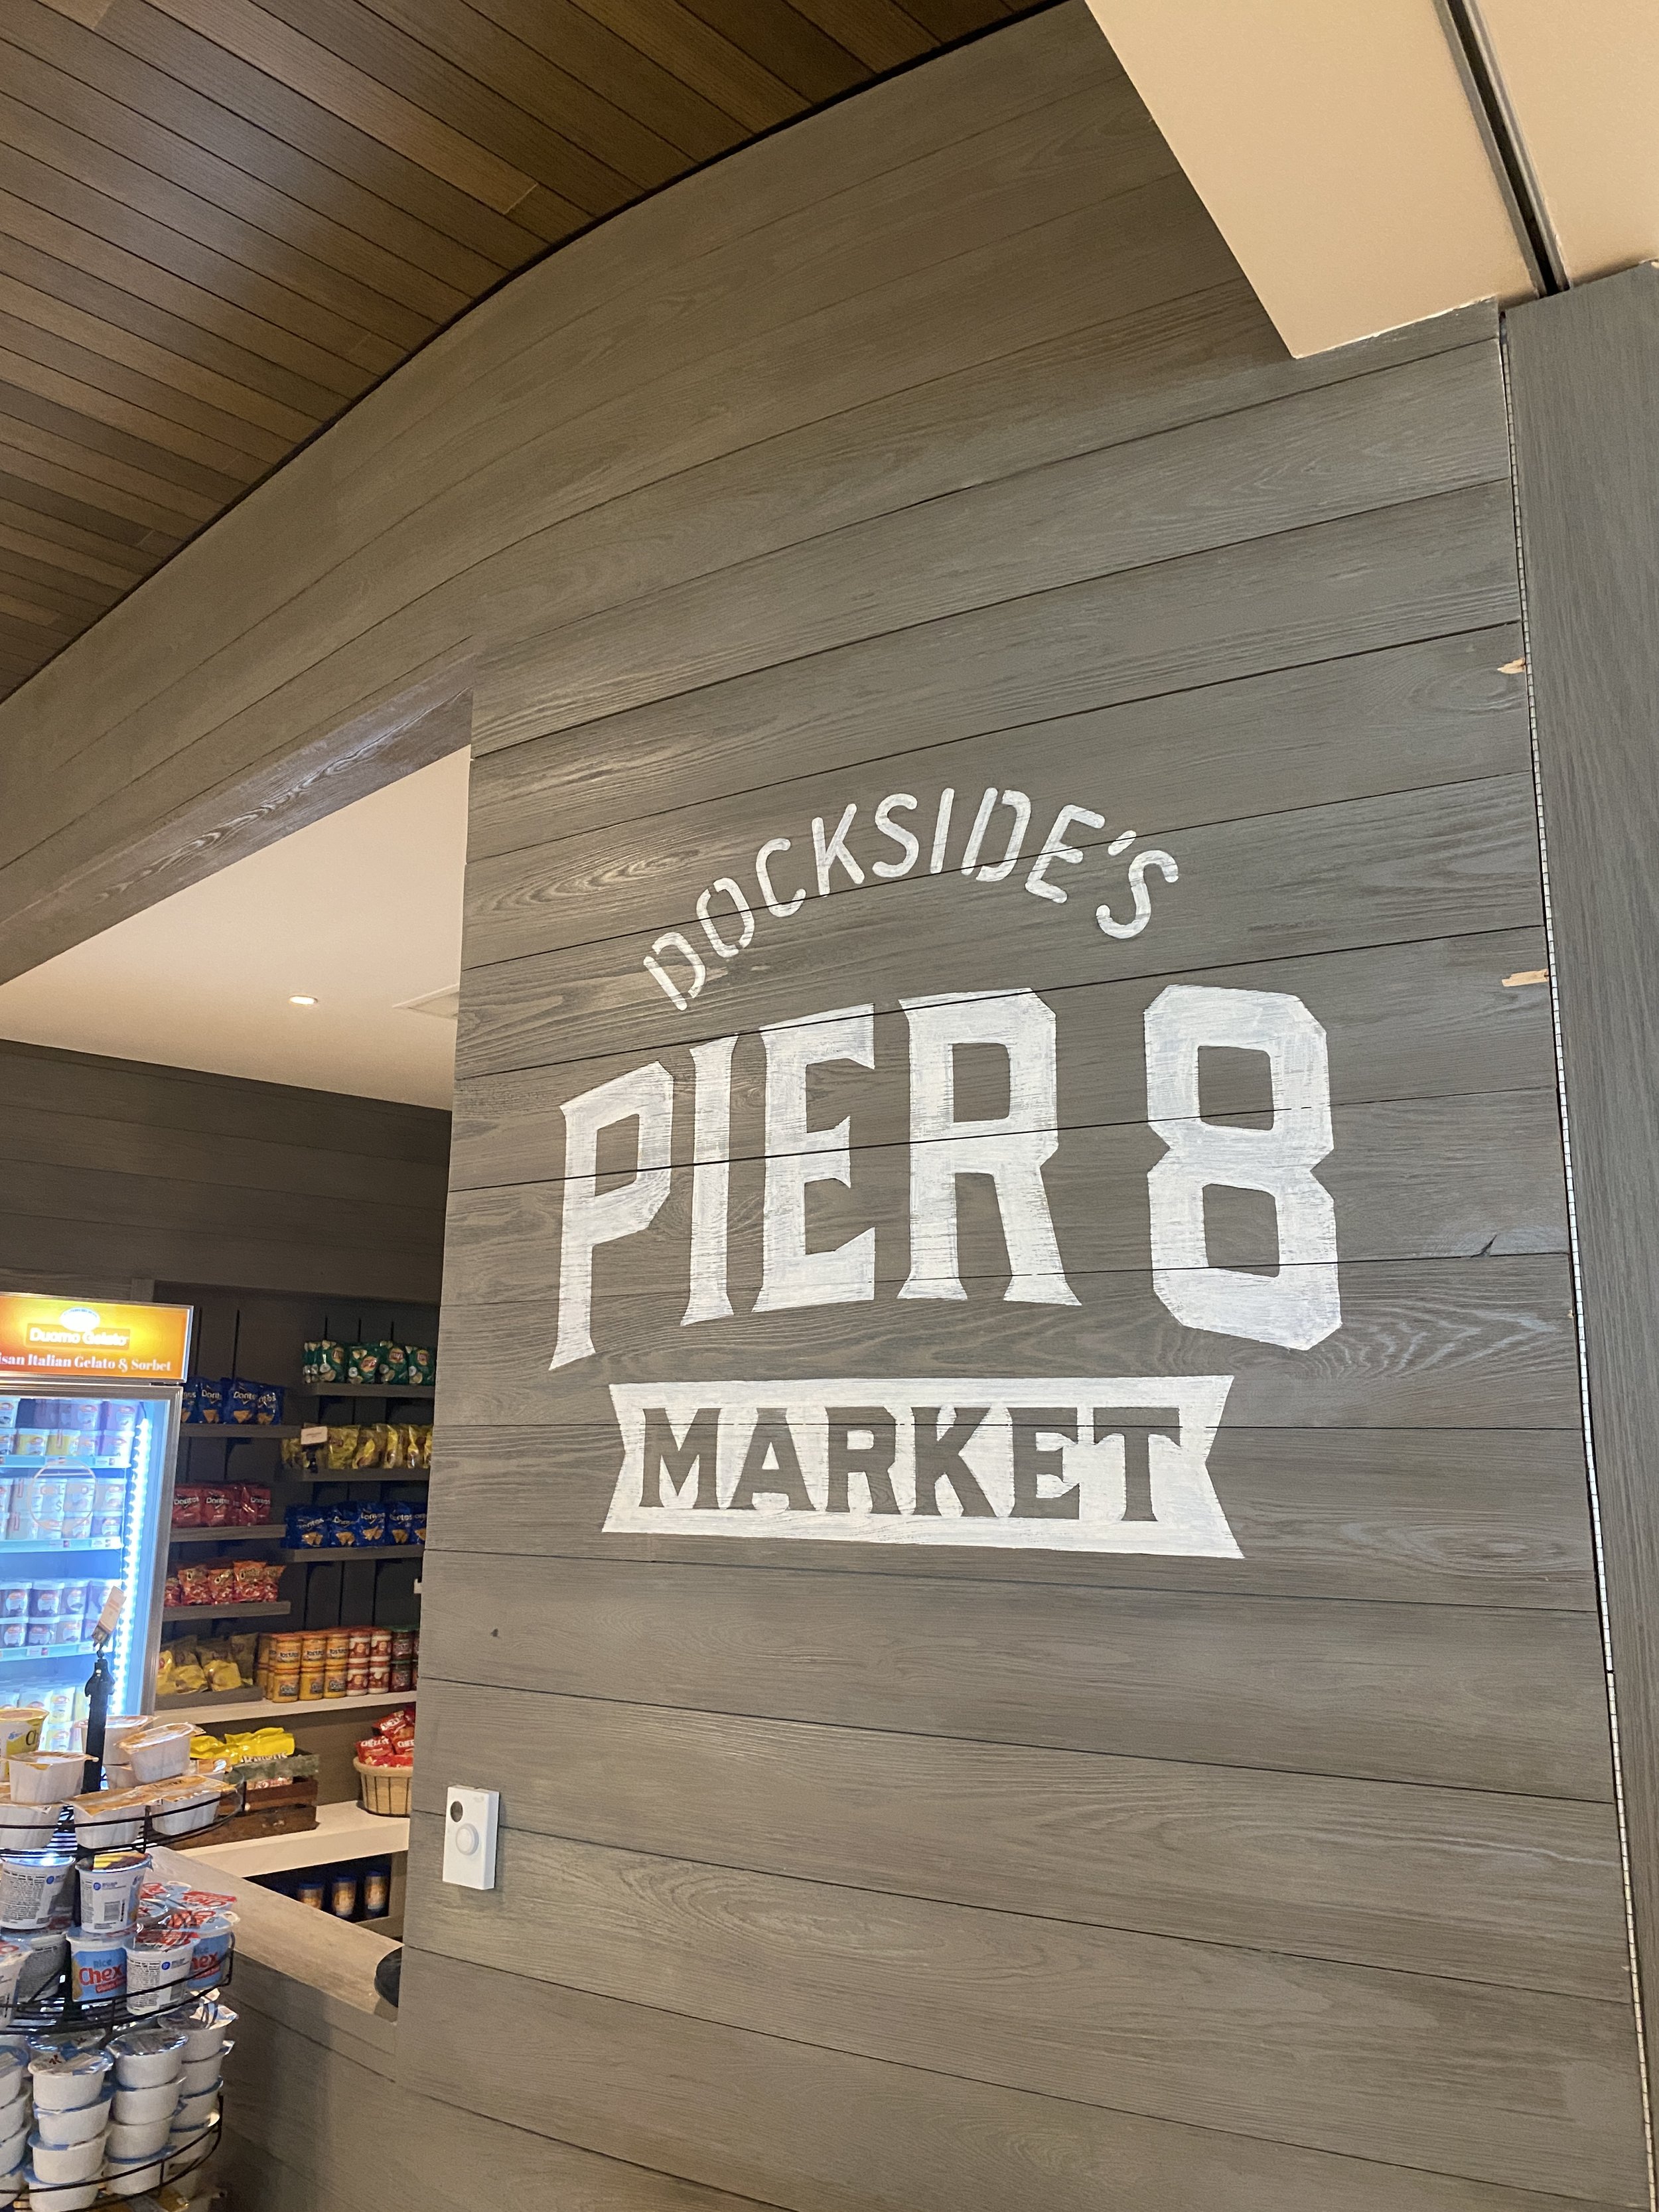  Pier 8 market is the quick service dining location at Dockside, with multiple stations.  